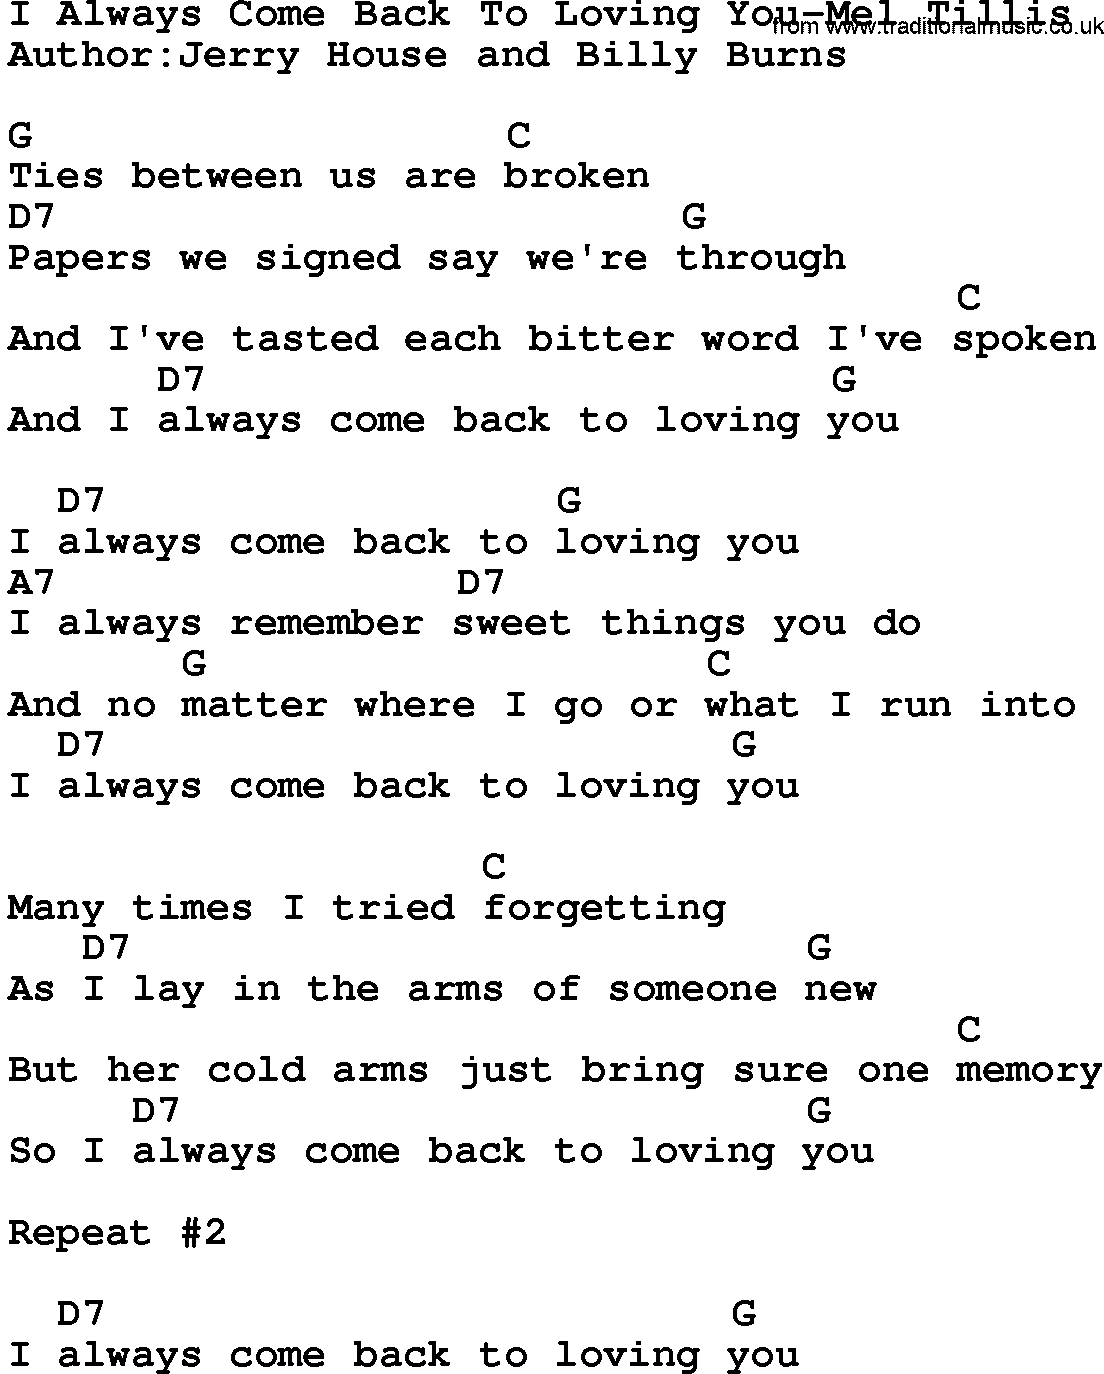 Country music song: I Always Come Back To Loving You-Mel Tillis lyrics and chords